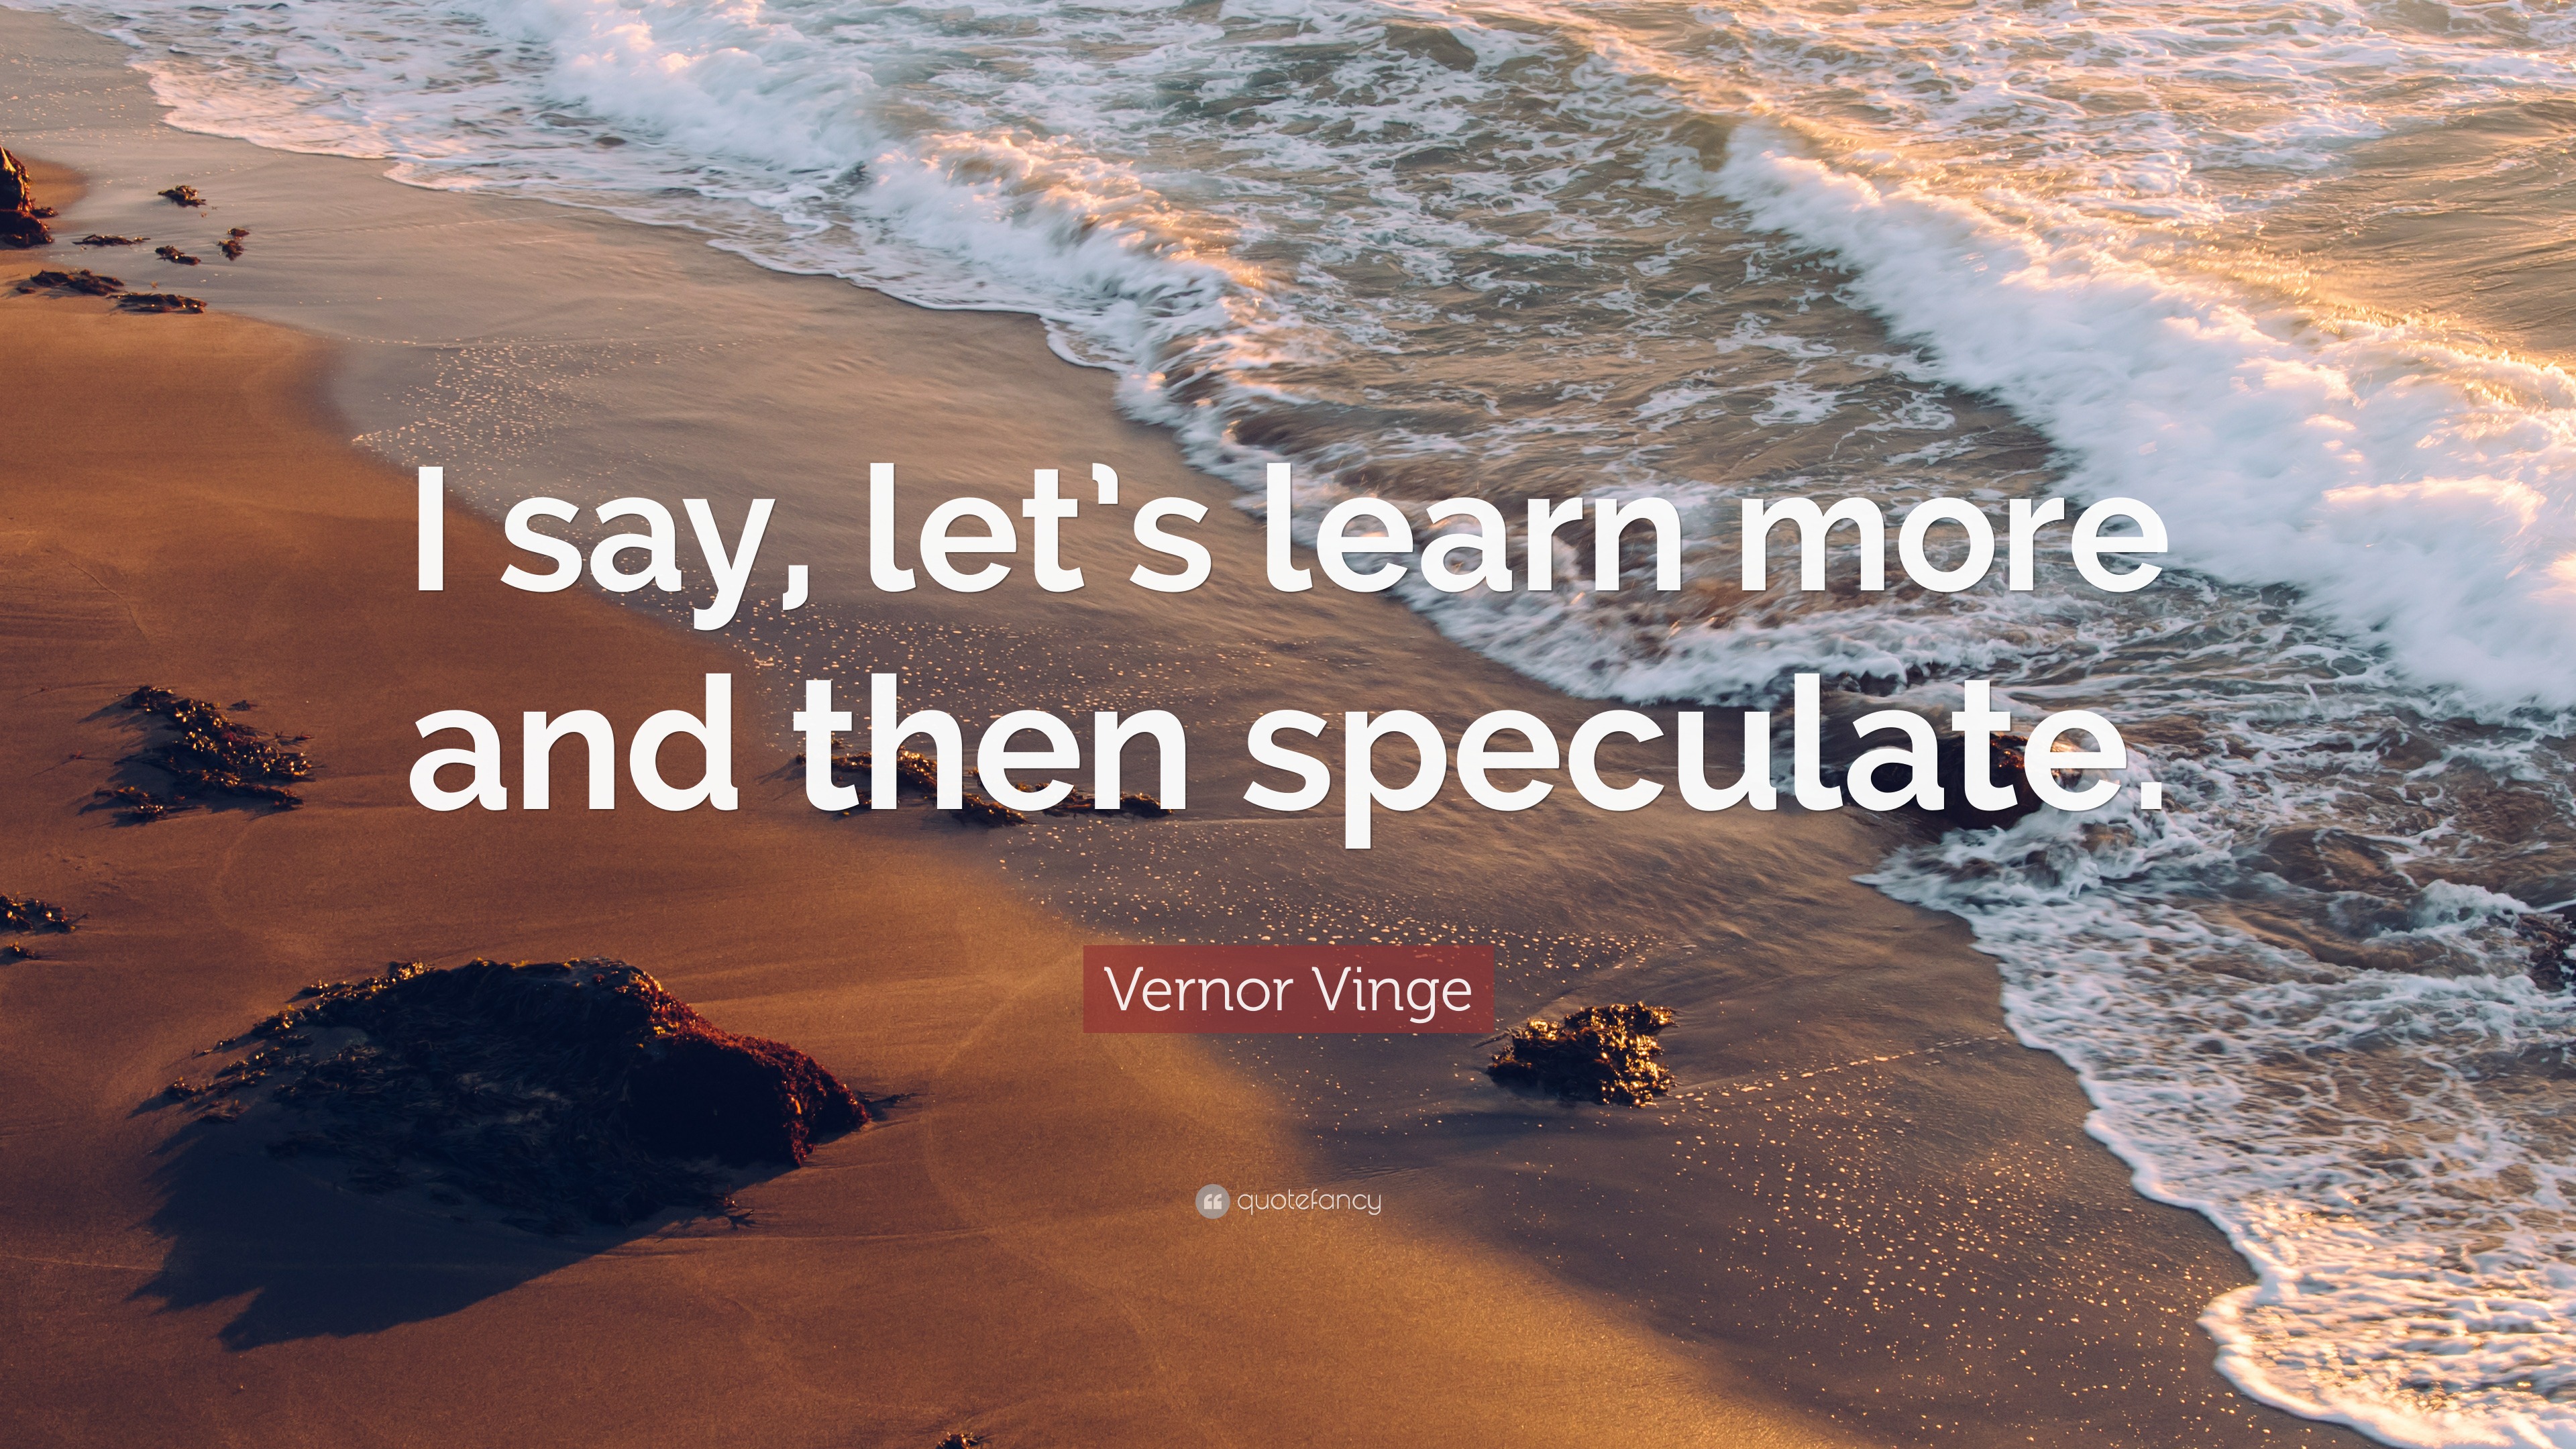 https://quotefancy.com/media/wallpaper/3840x2160/3025692-Vernor-Vinge-Quote-I-say-let-s-learn-more-and-then-speculate.jpg